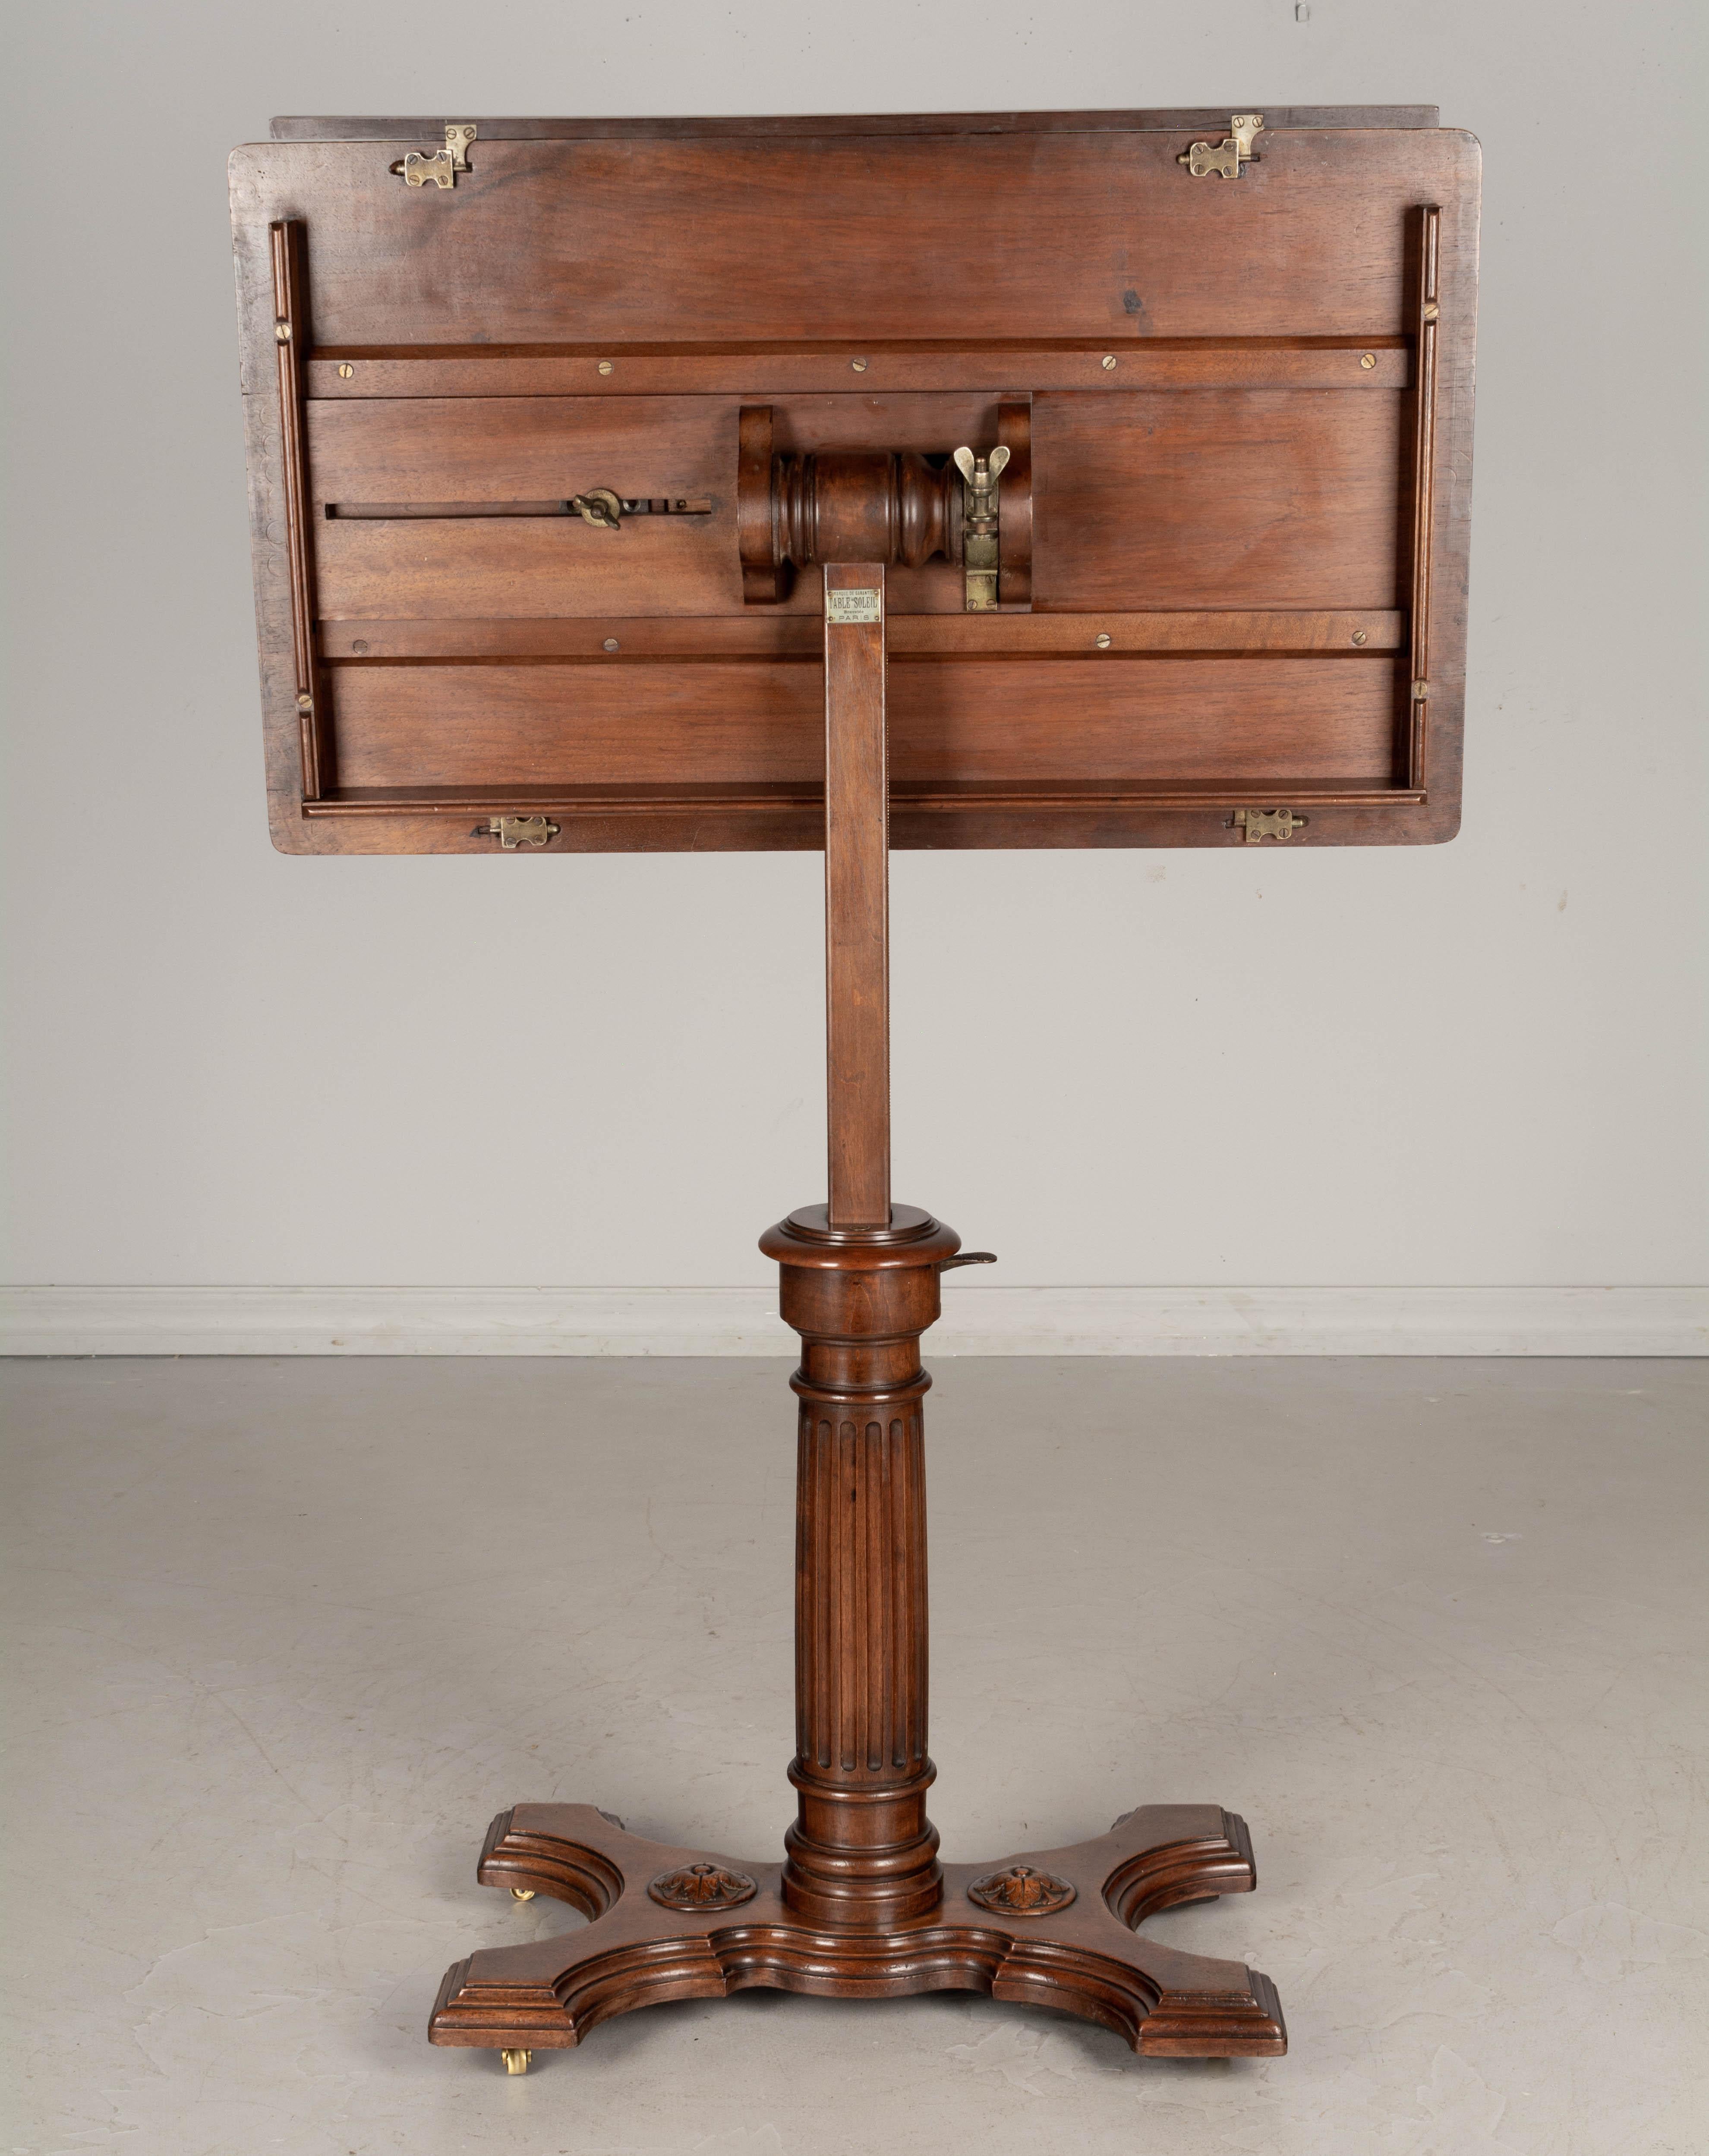 Cast 19th Century Adjustable Writing Table, or Easel